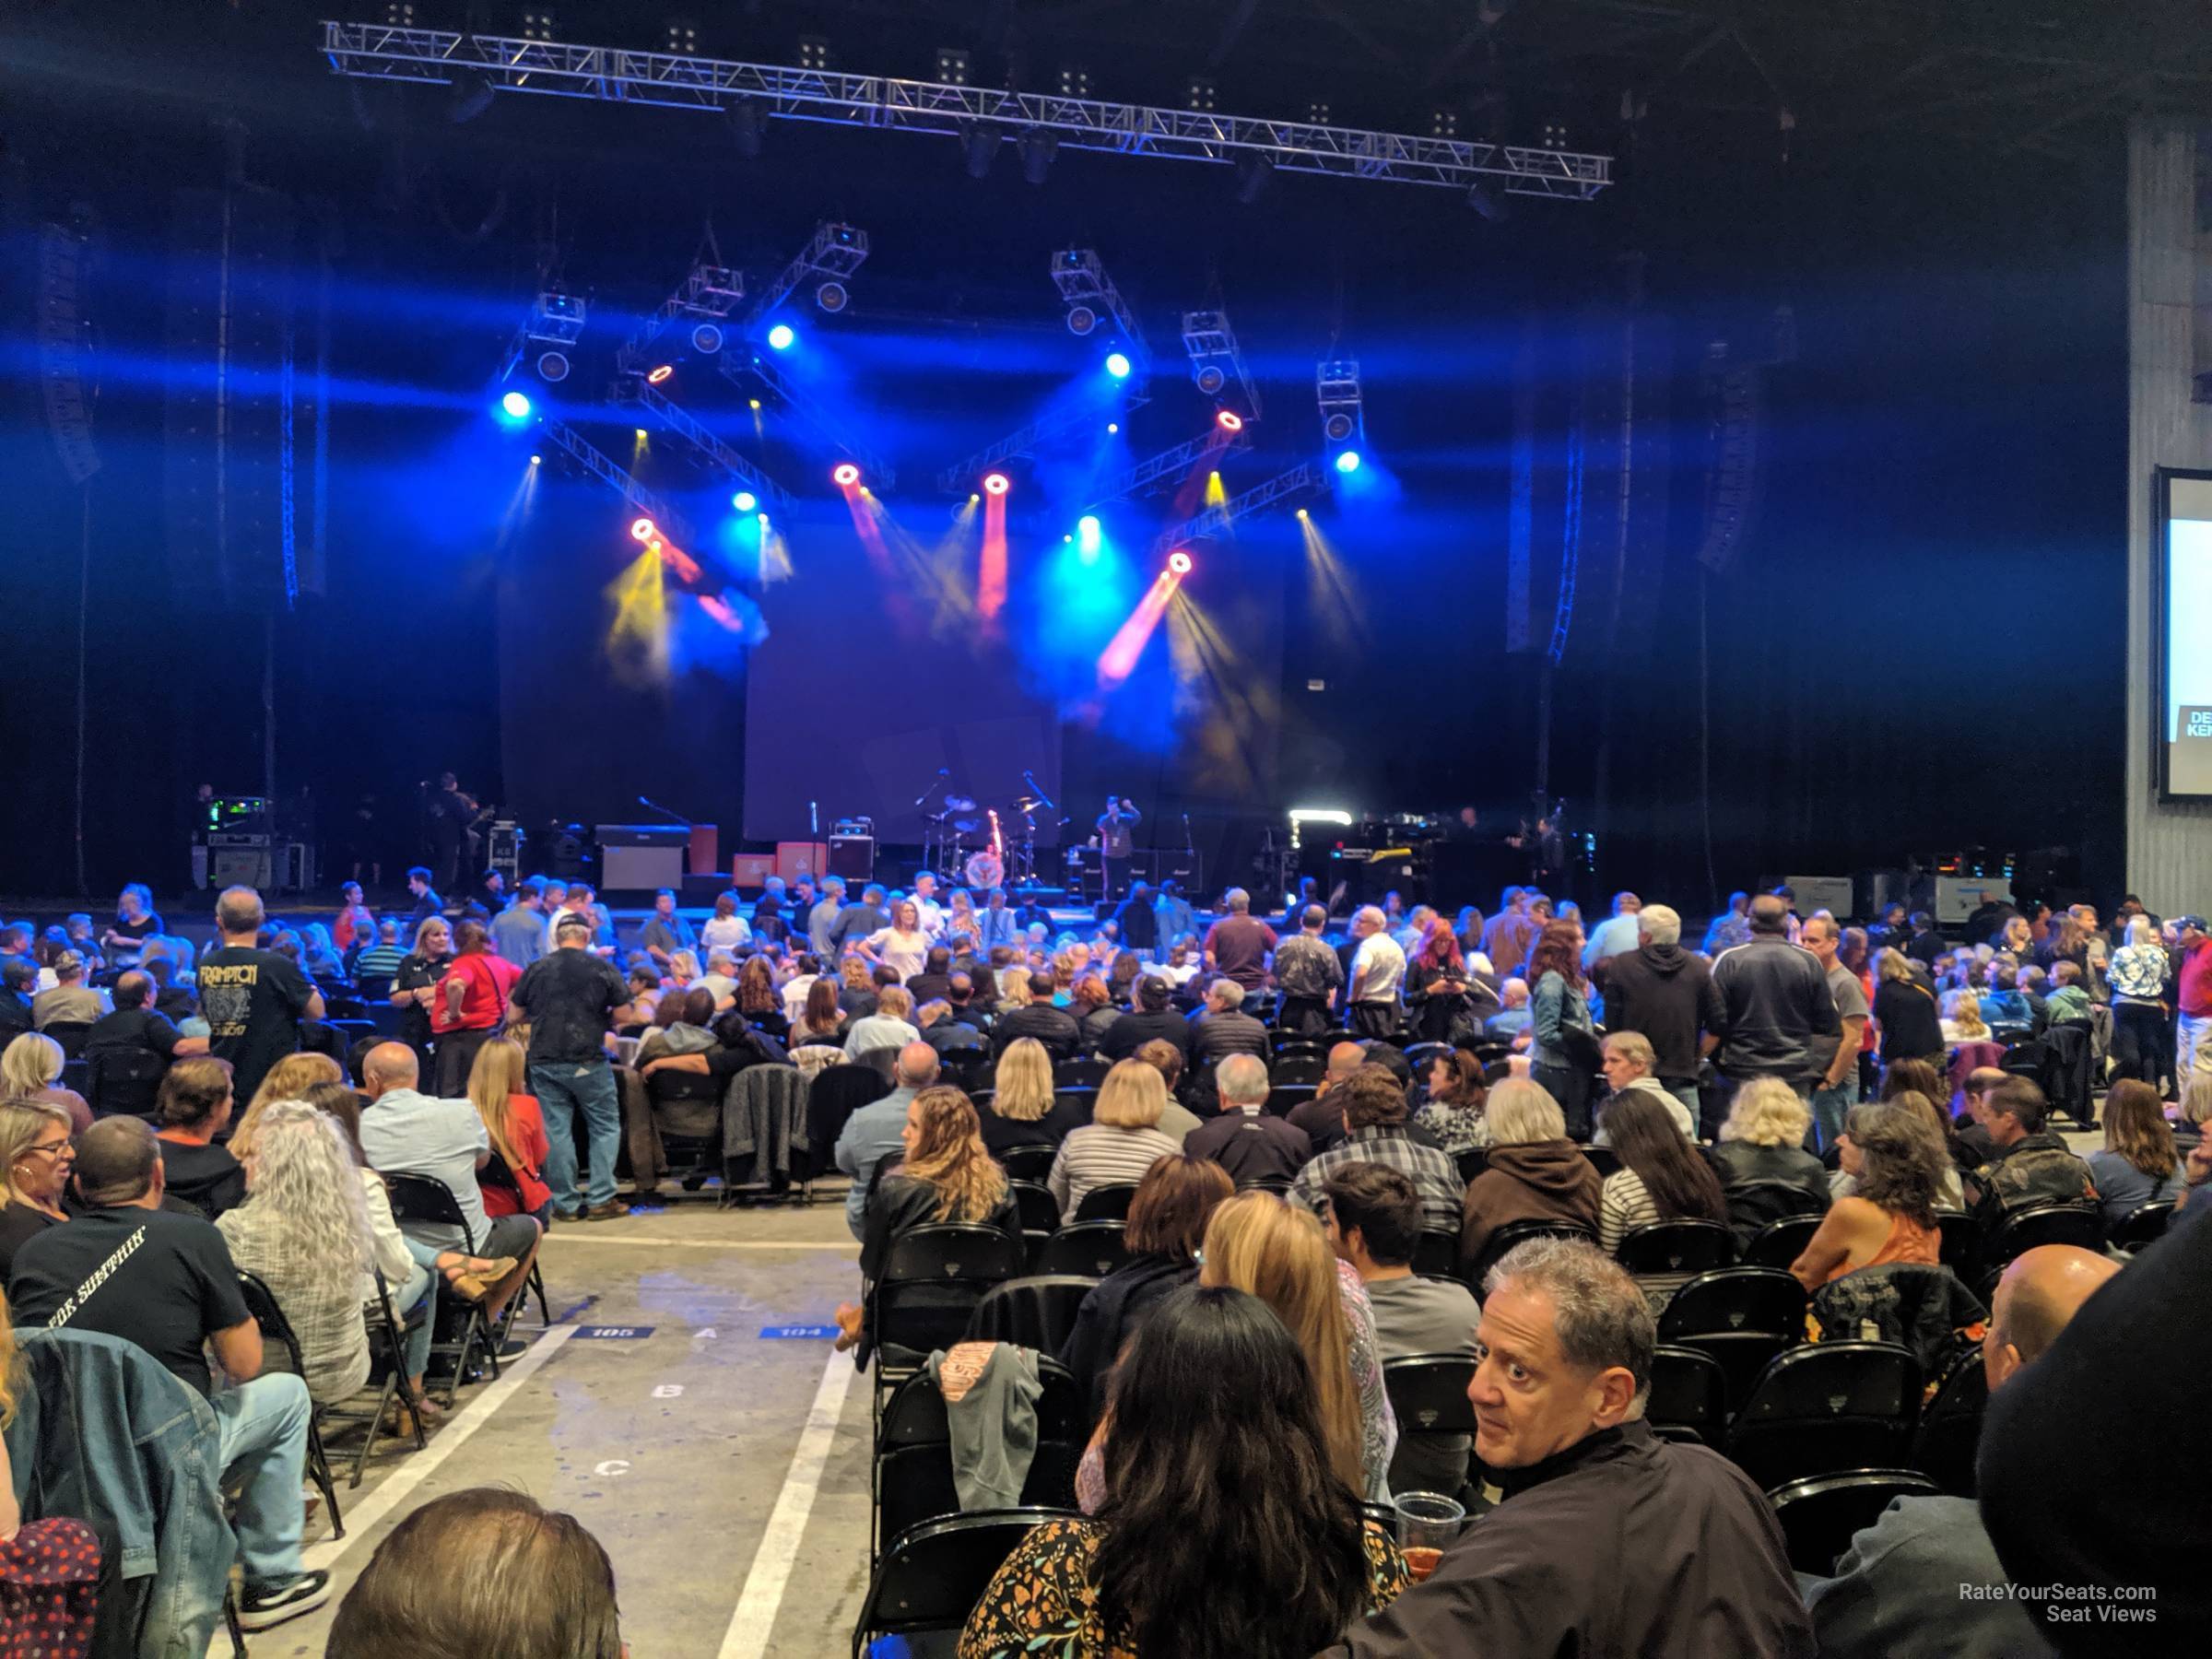 section 104, row k seat view  - concord pavilion